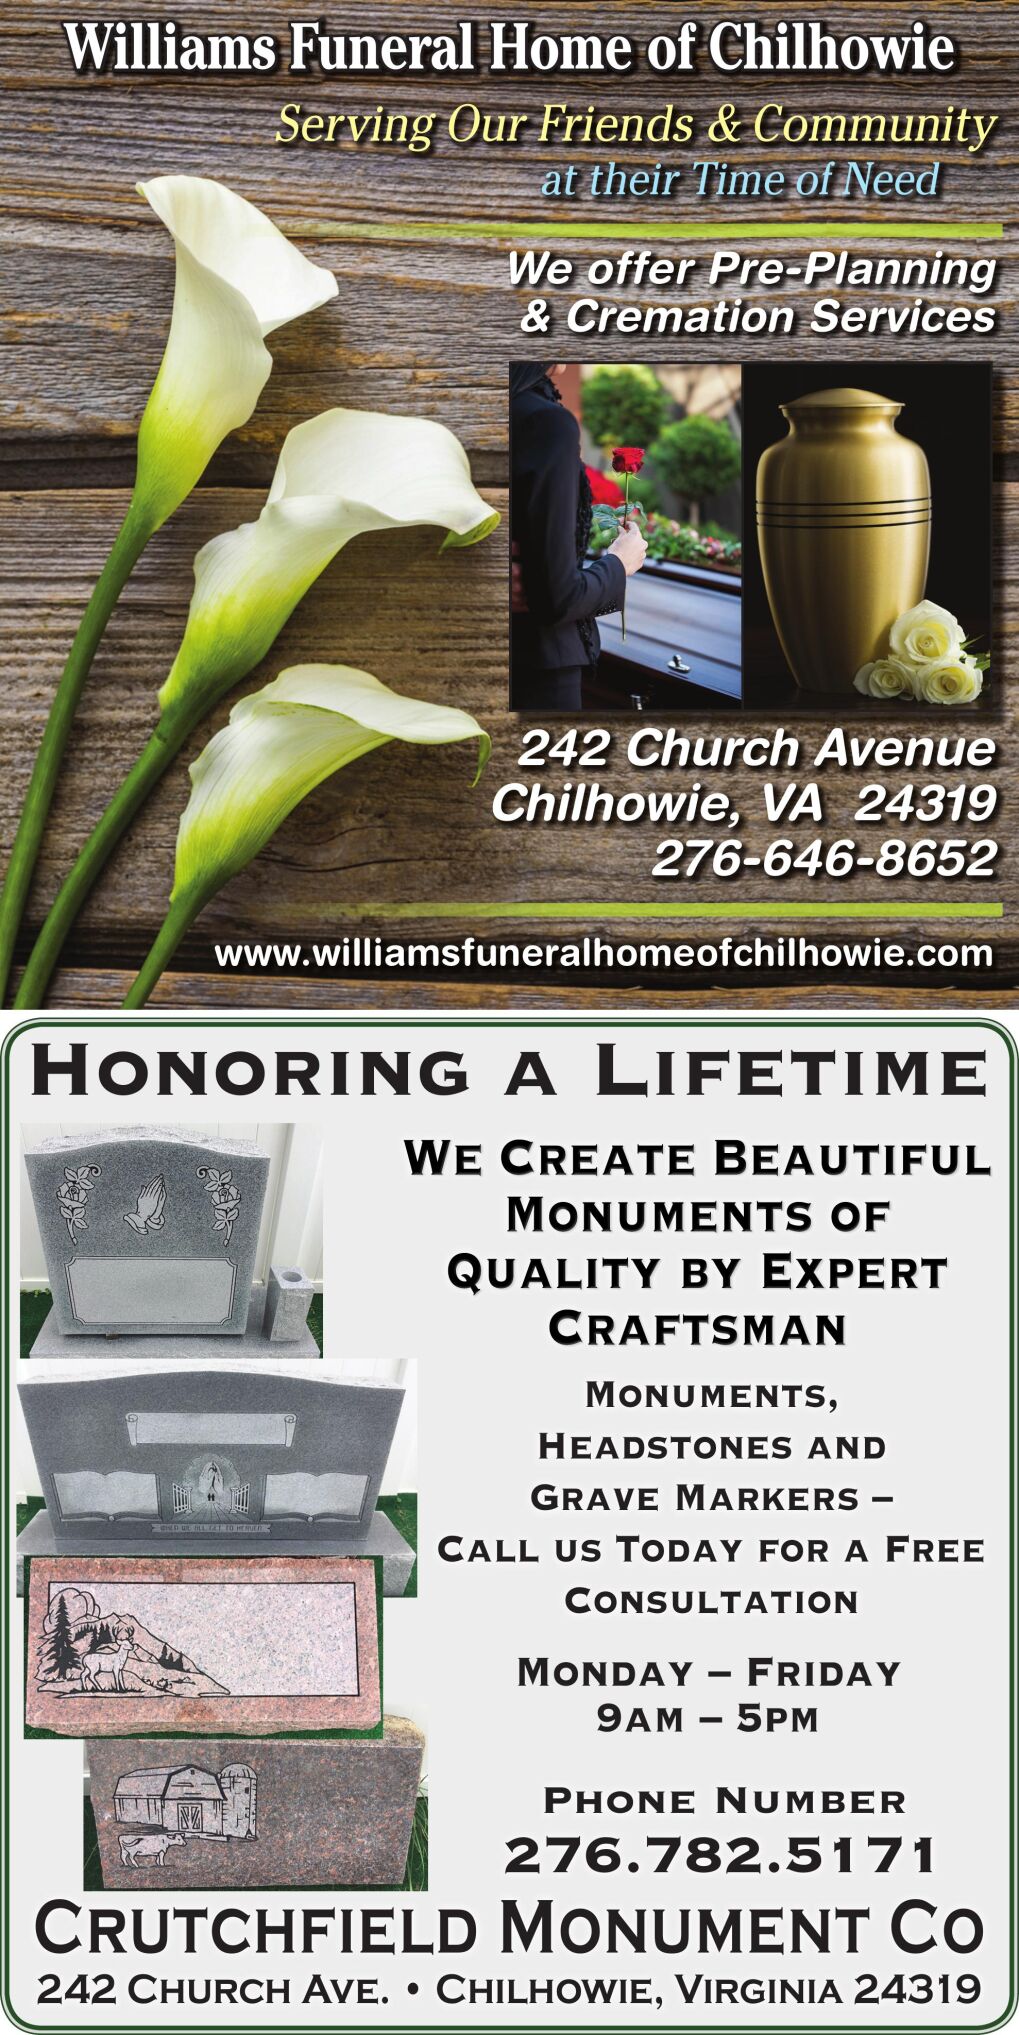 WILLIAMS FUNERAL HOME